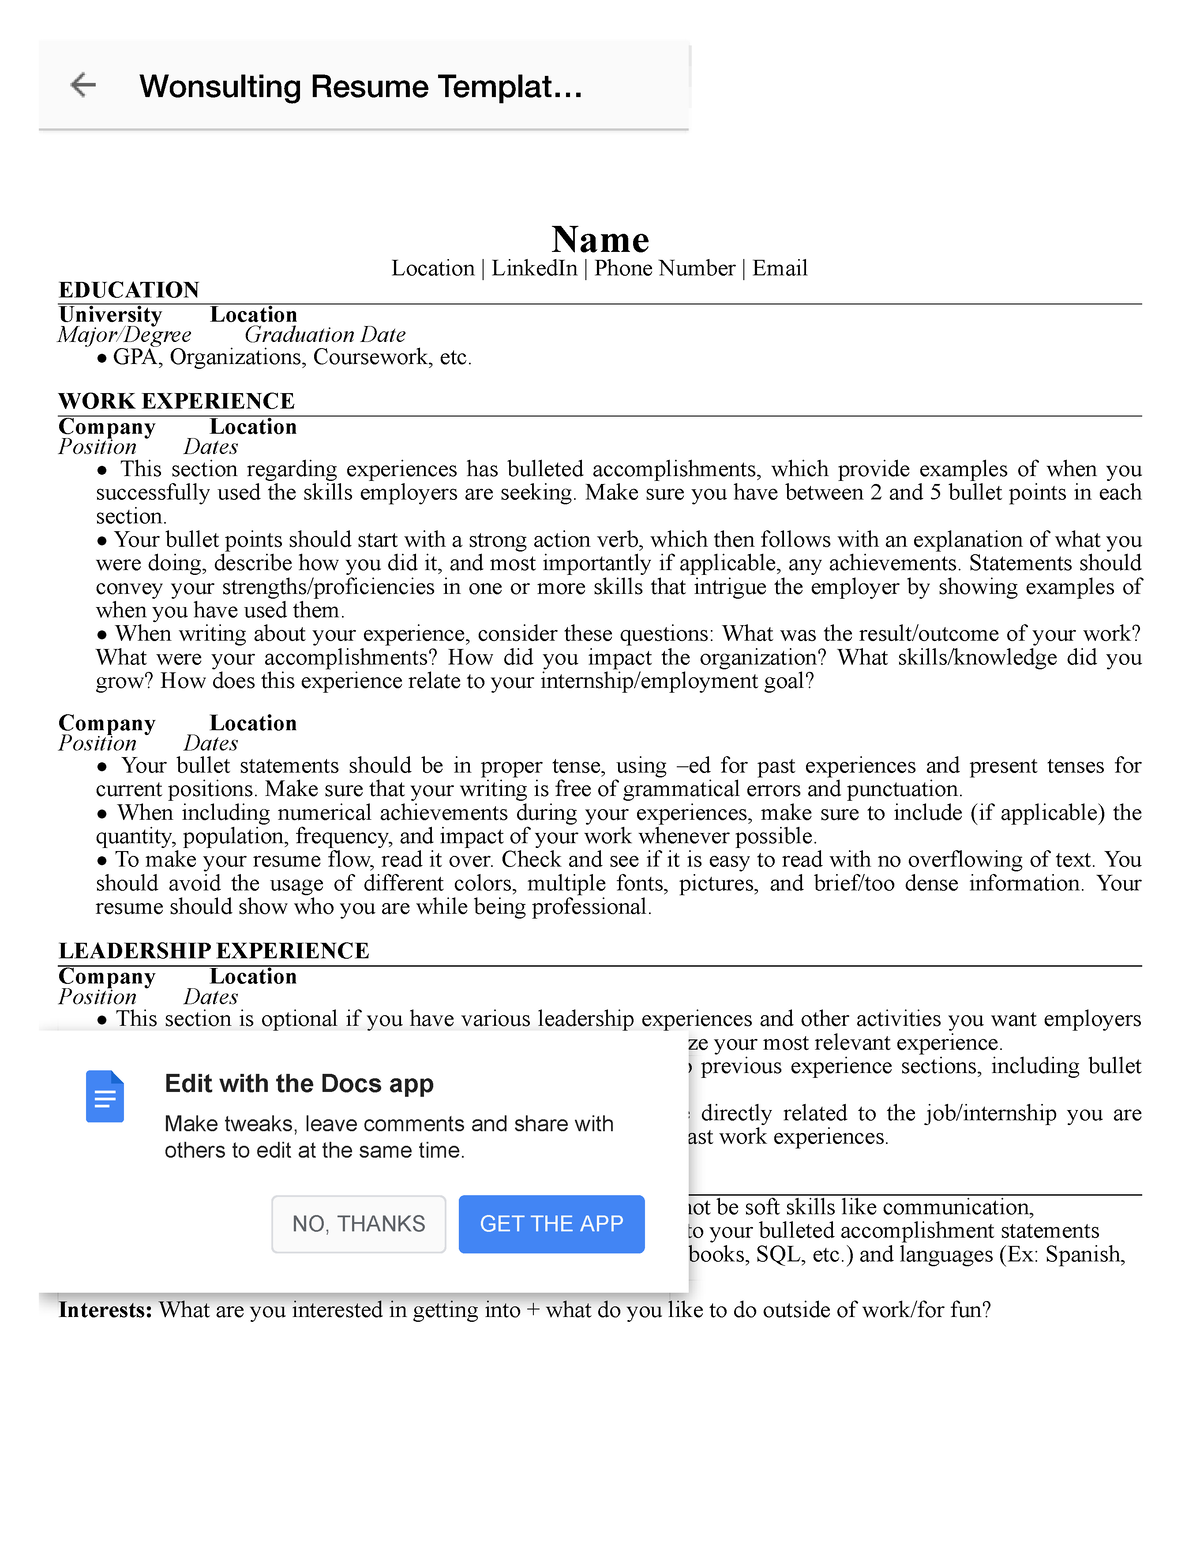 Wonsulting Resume Template (FILE MAKE A COPY) Name Location